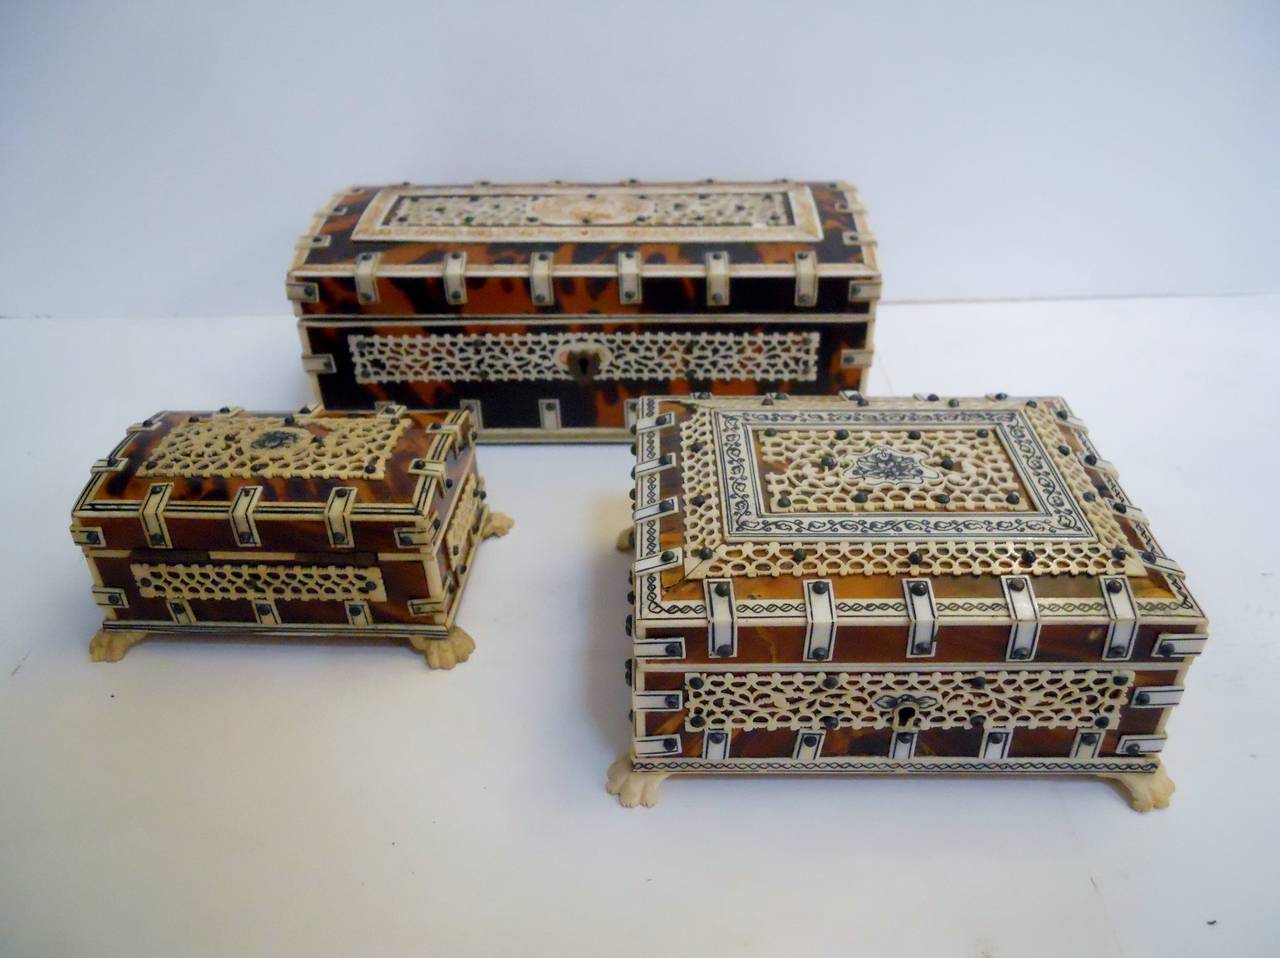 Three mid 20th century Anglo Indian boxes with strap design. Made of bone and shell. Please note that the smallest box is missing some fretwork on top of the box.

Largest measures 7w x 3d x 2.5h
Medium measures 5w x 4d x 2.25h
Small measures